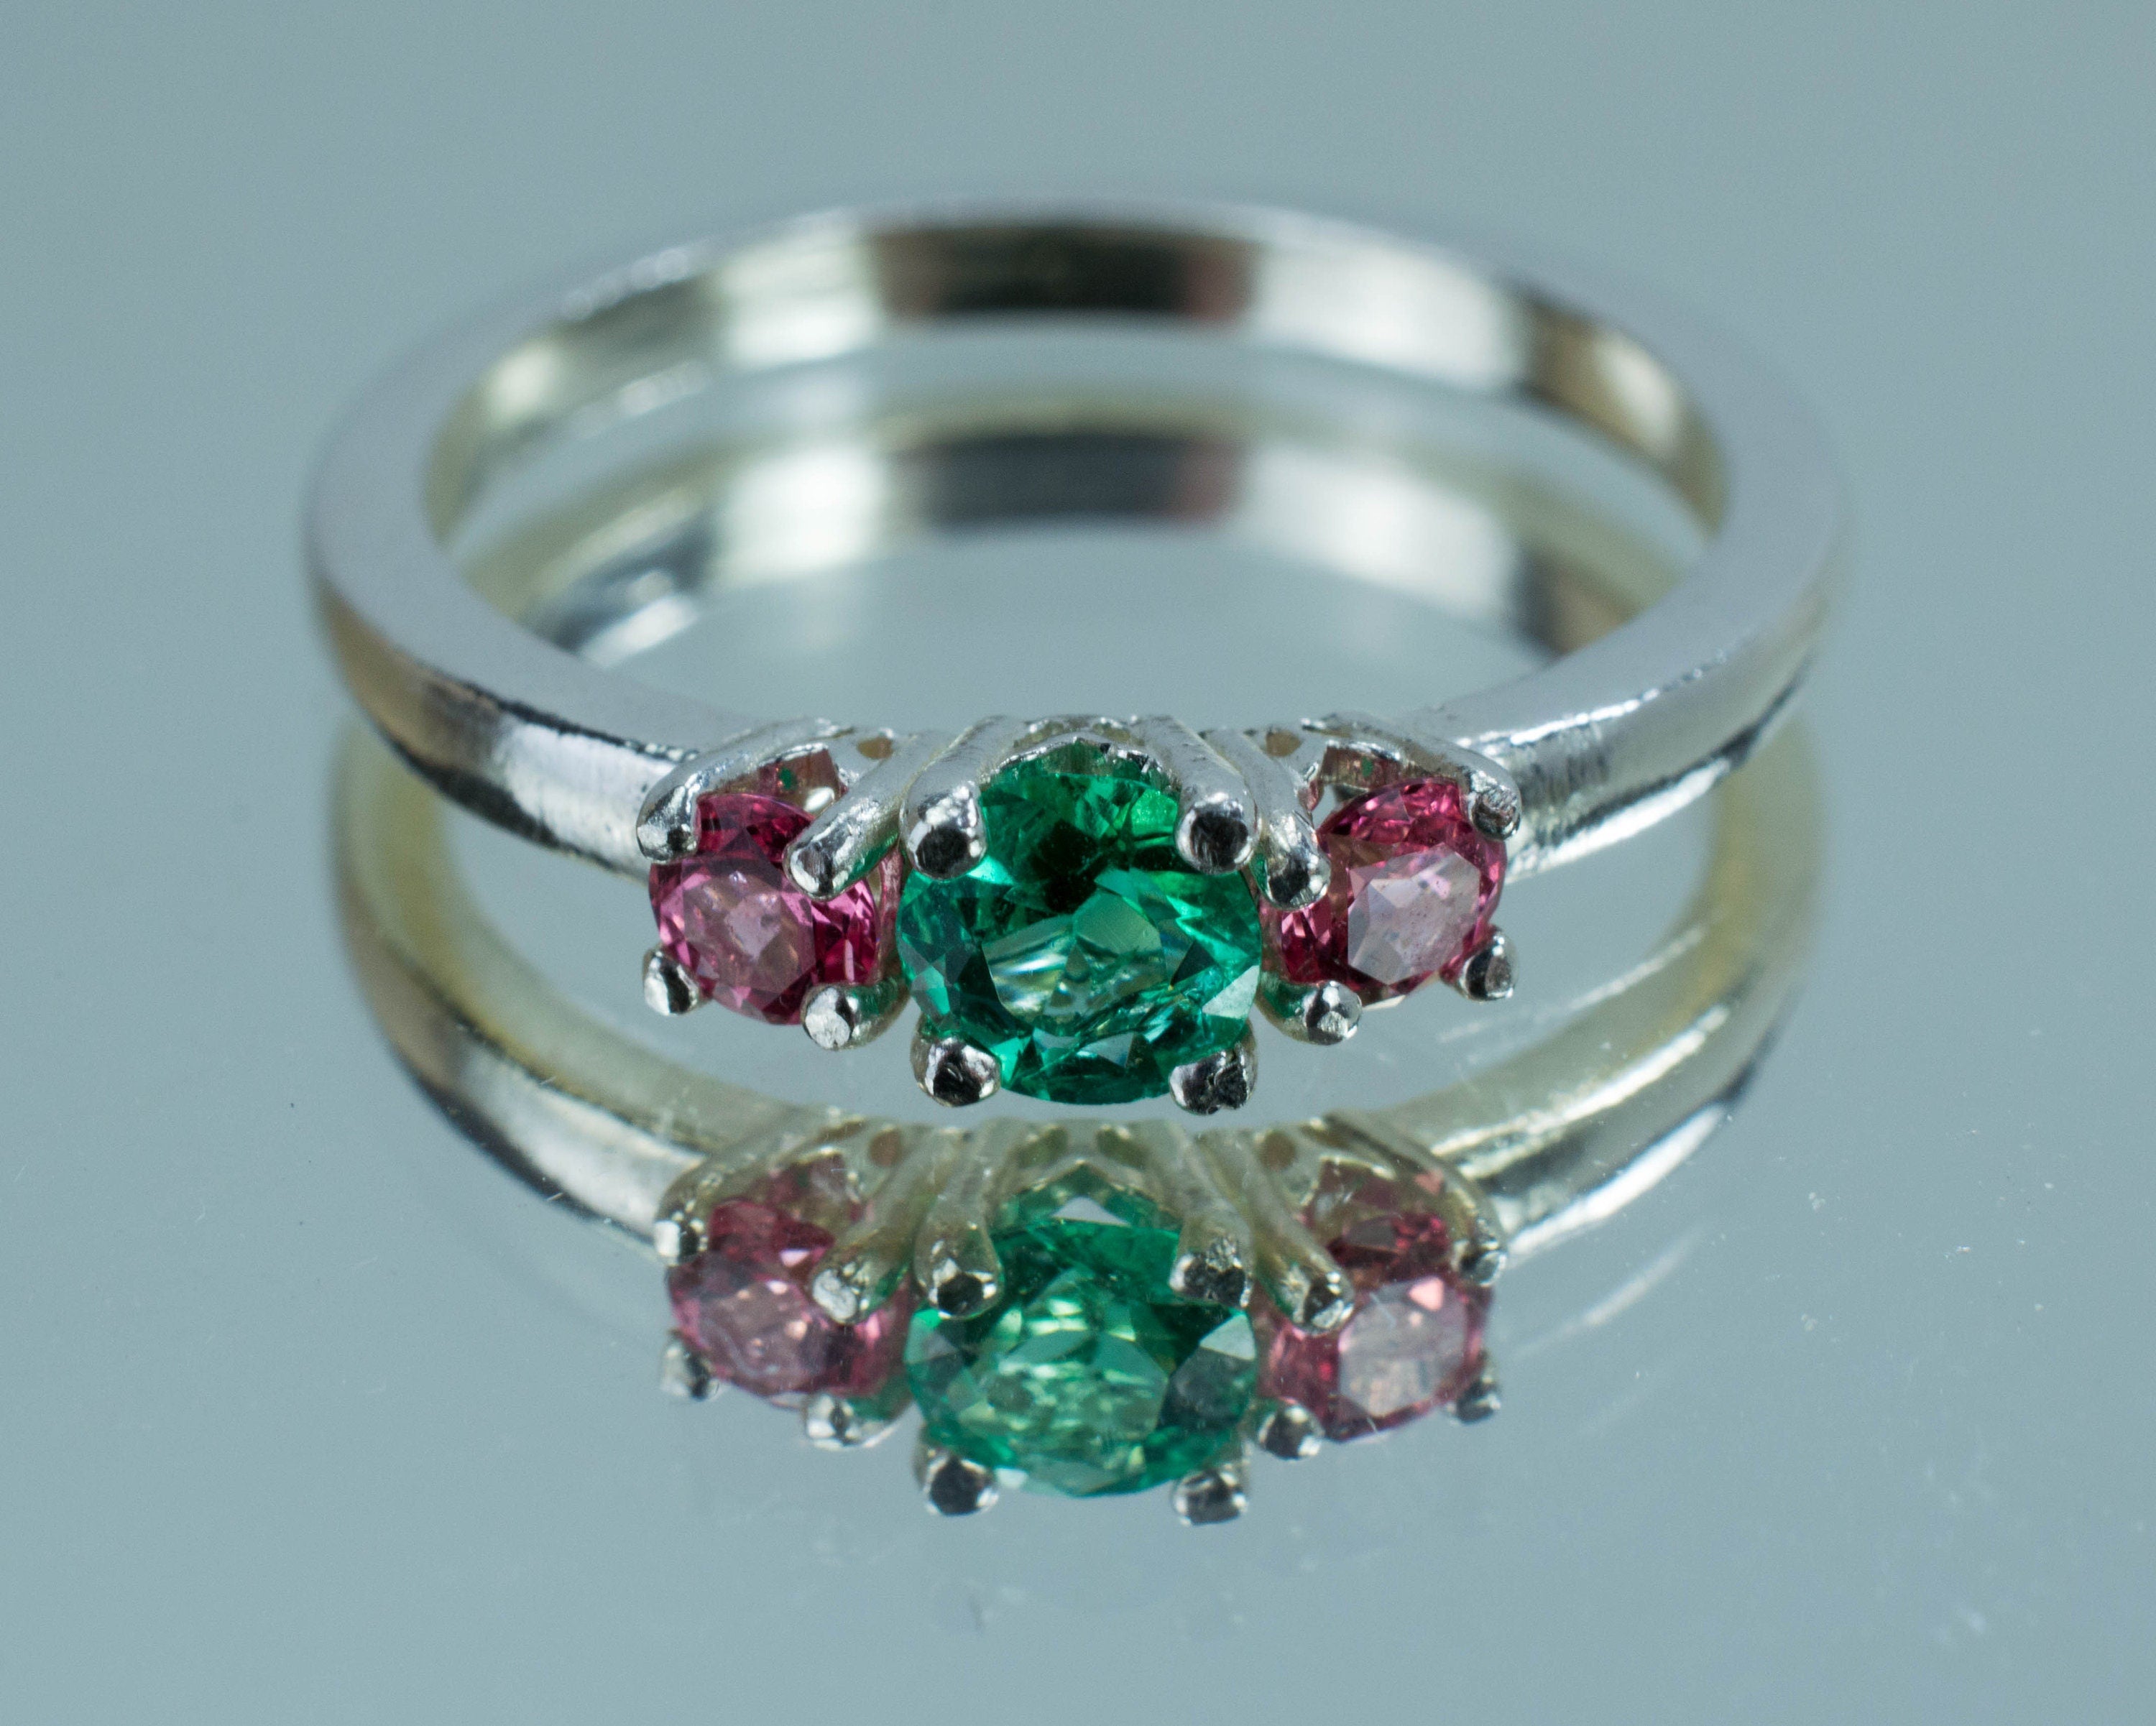 Emerald and Spinel Ring; Genuine Untreated Colombian Emerald and Vietnam Spinel; Emerald Ring; Pink Spinel Ring - Mark Oliver Gems